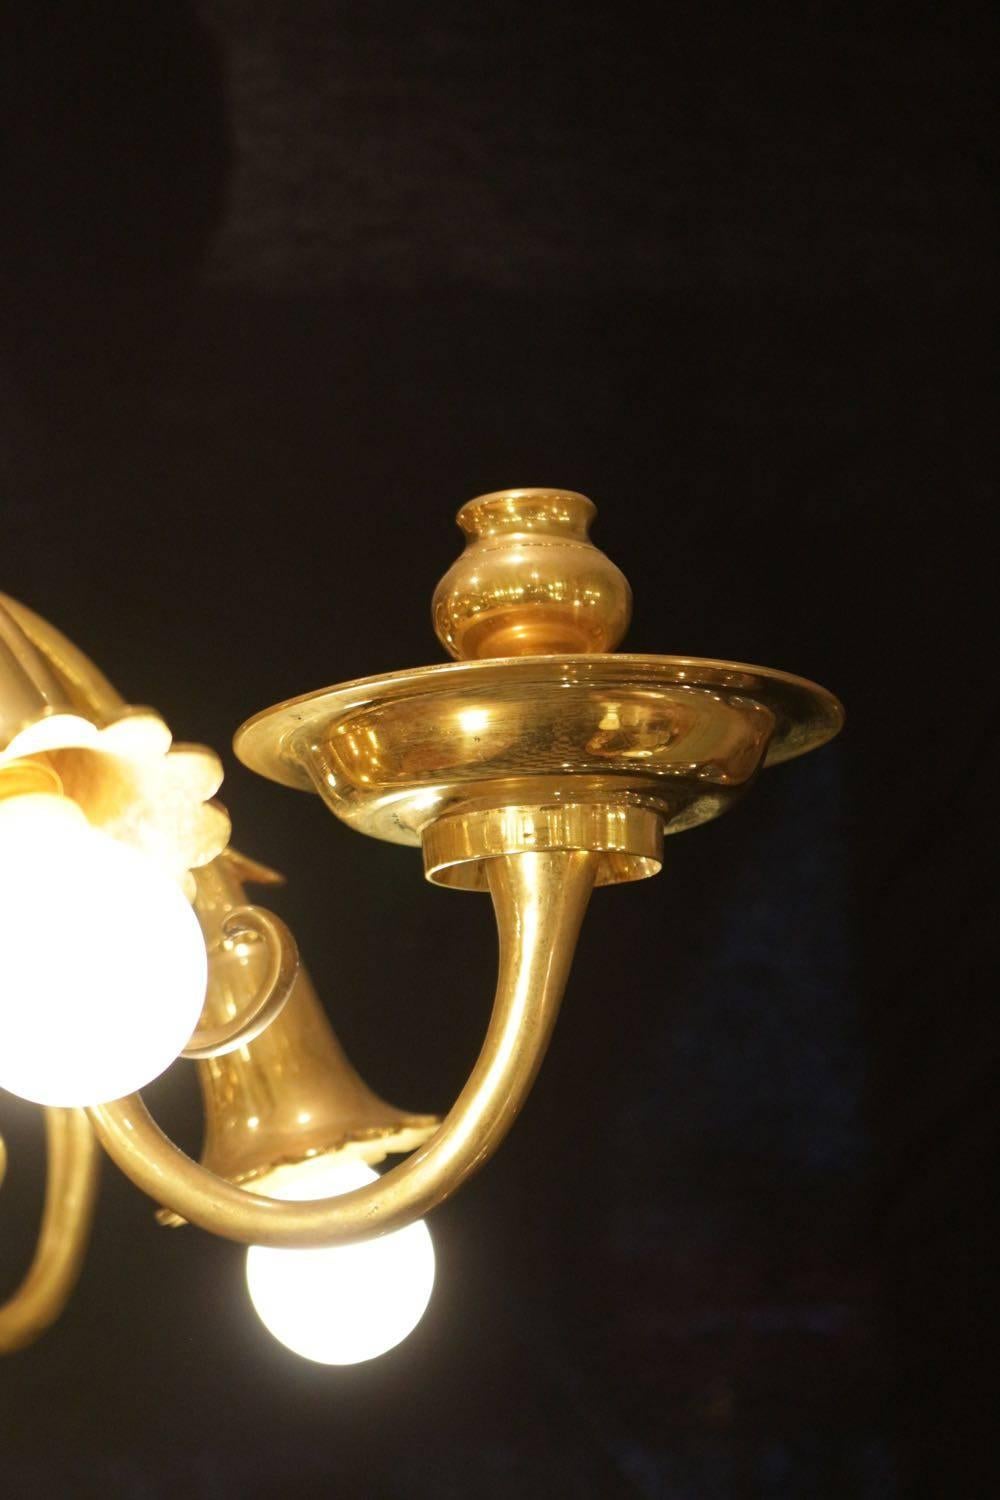 French Superior Quality Solid Brass Dutch Style Chandelier from the 19th Century